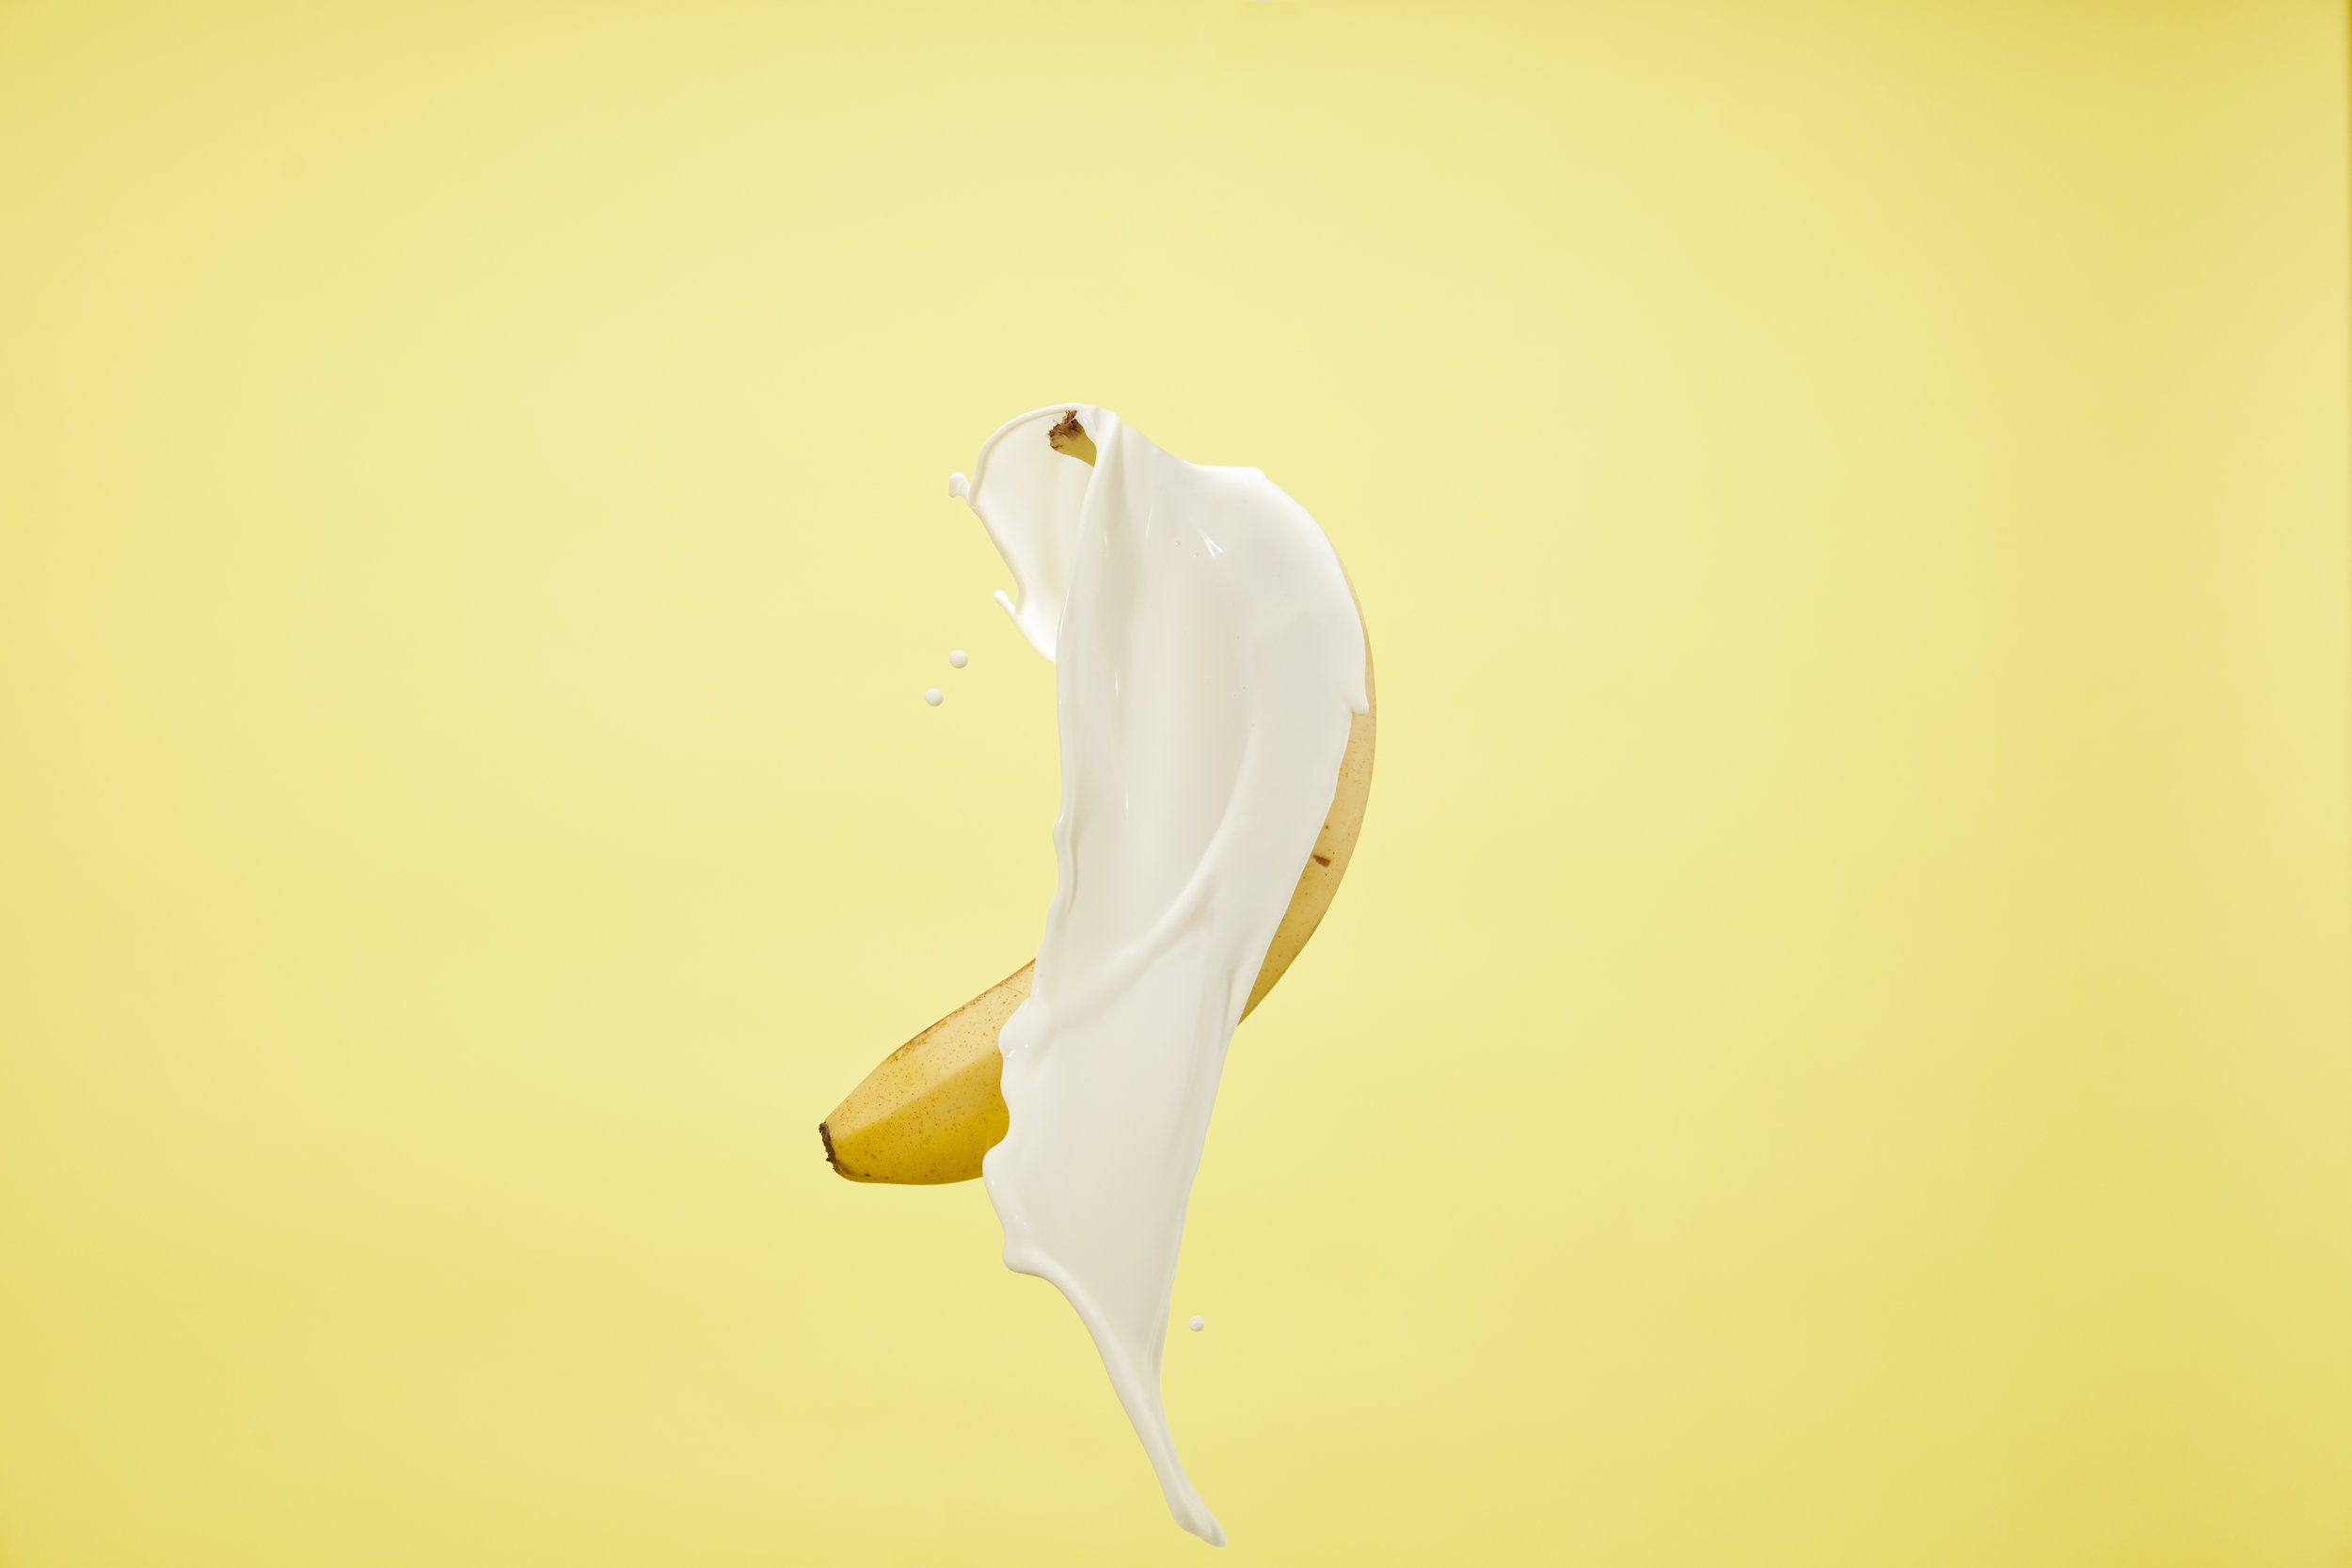 A Banana being splashed by milk, Anomaly